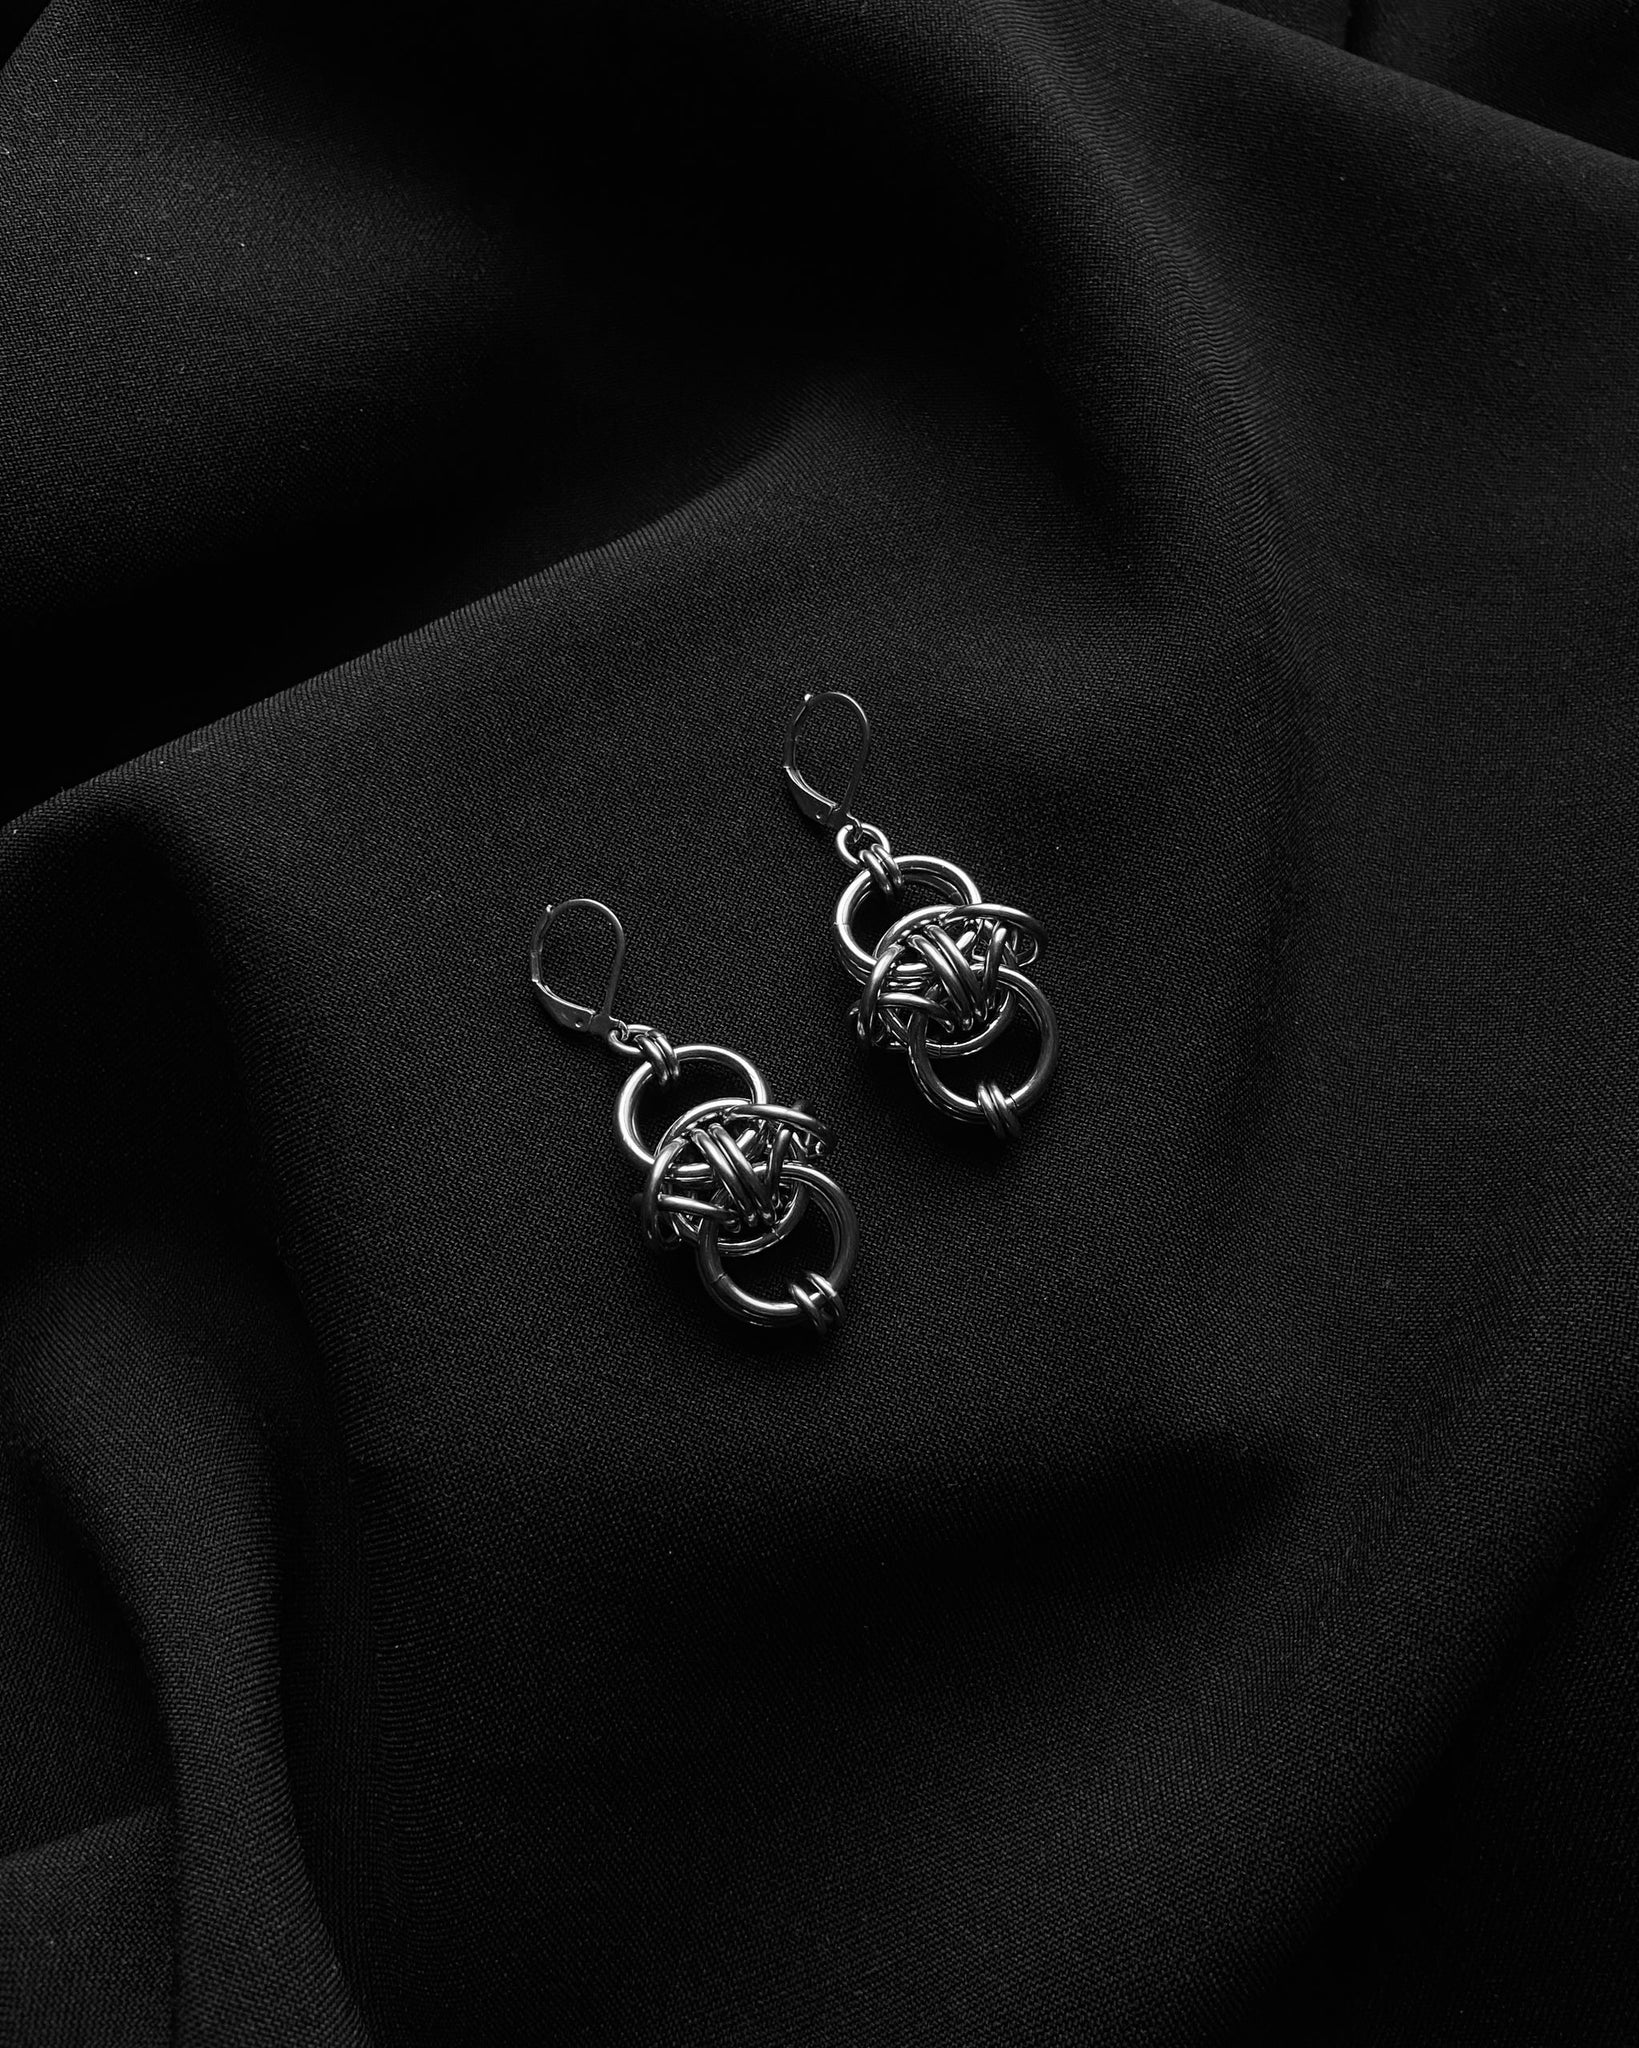 Inside Out Barbed Wire Earrings (Stainless Steel)